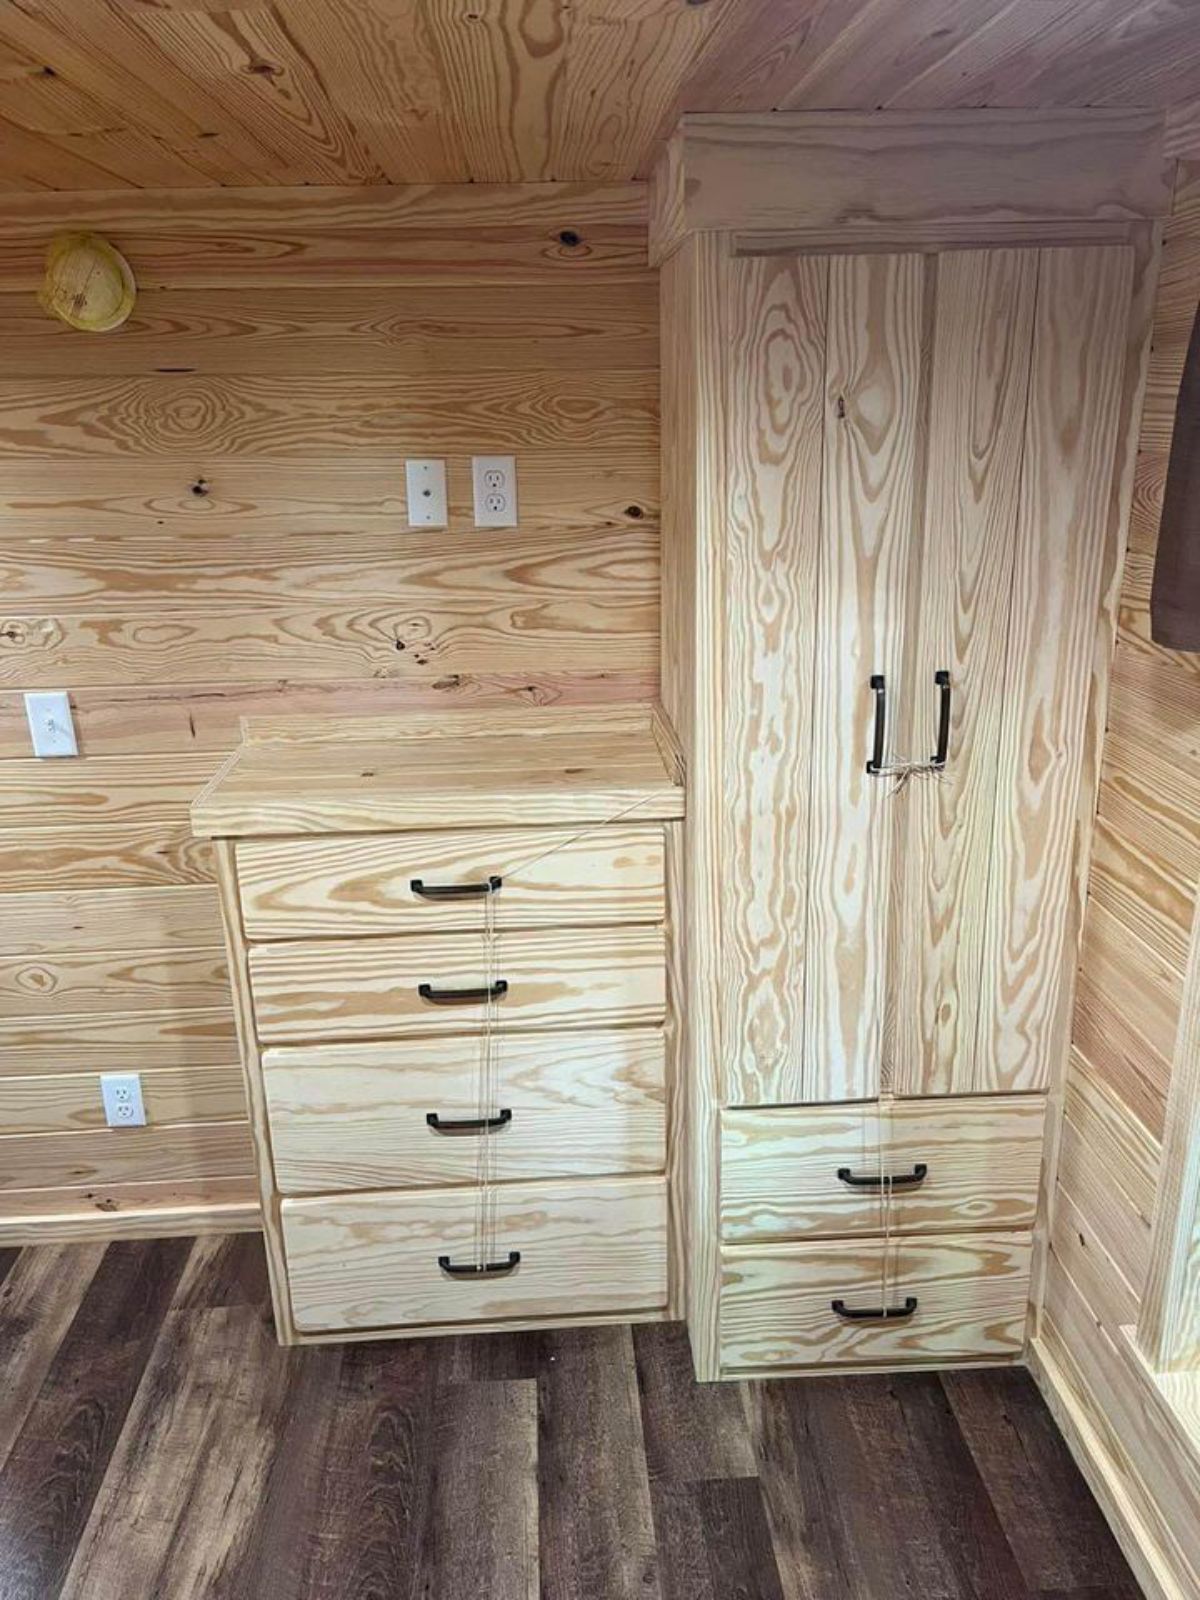 Wardrobe and storage cabinets are included in the deal